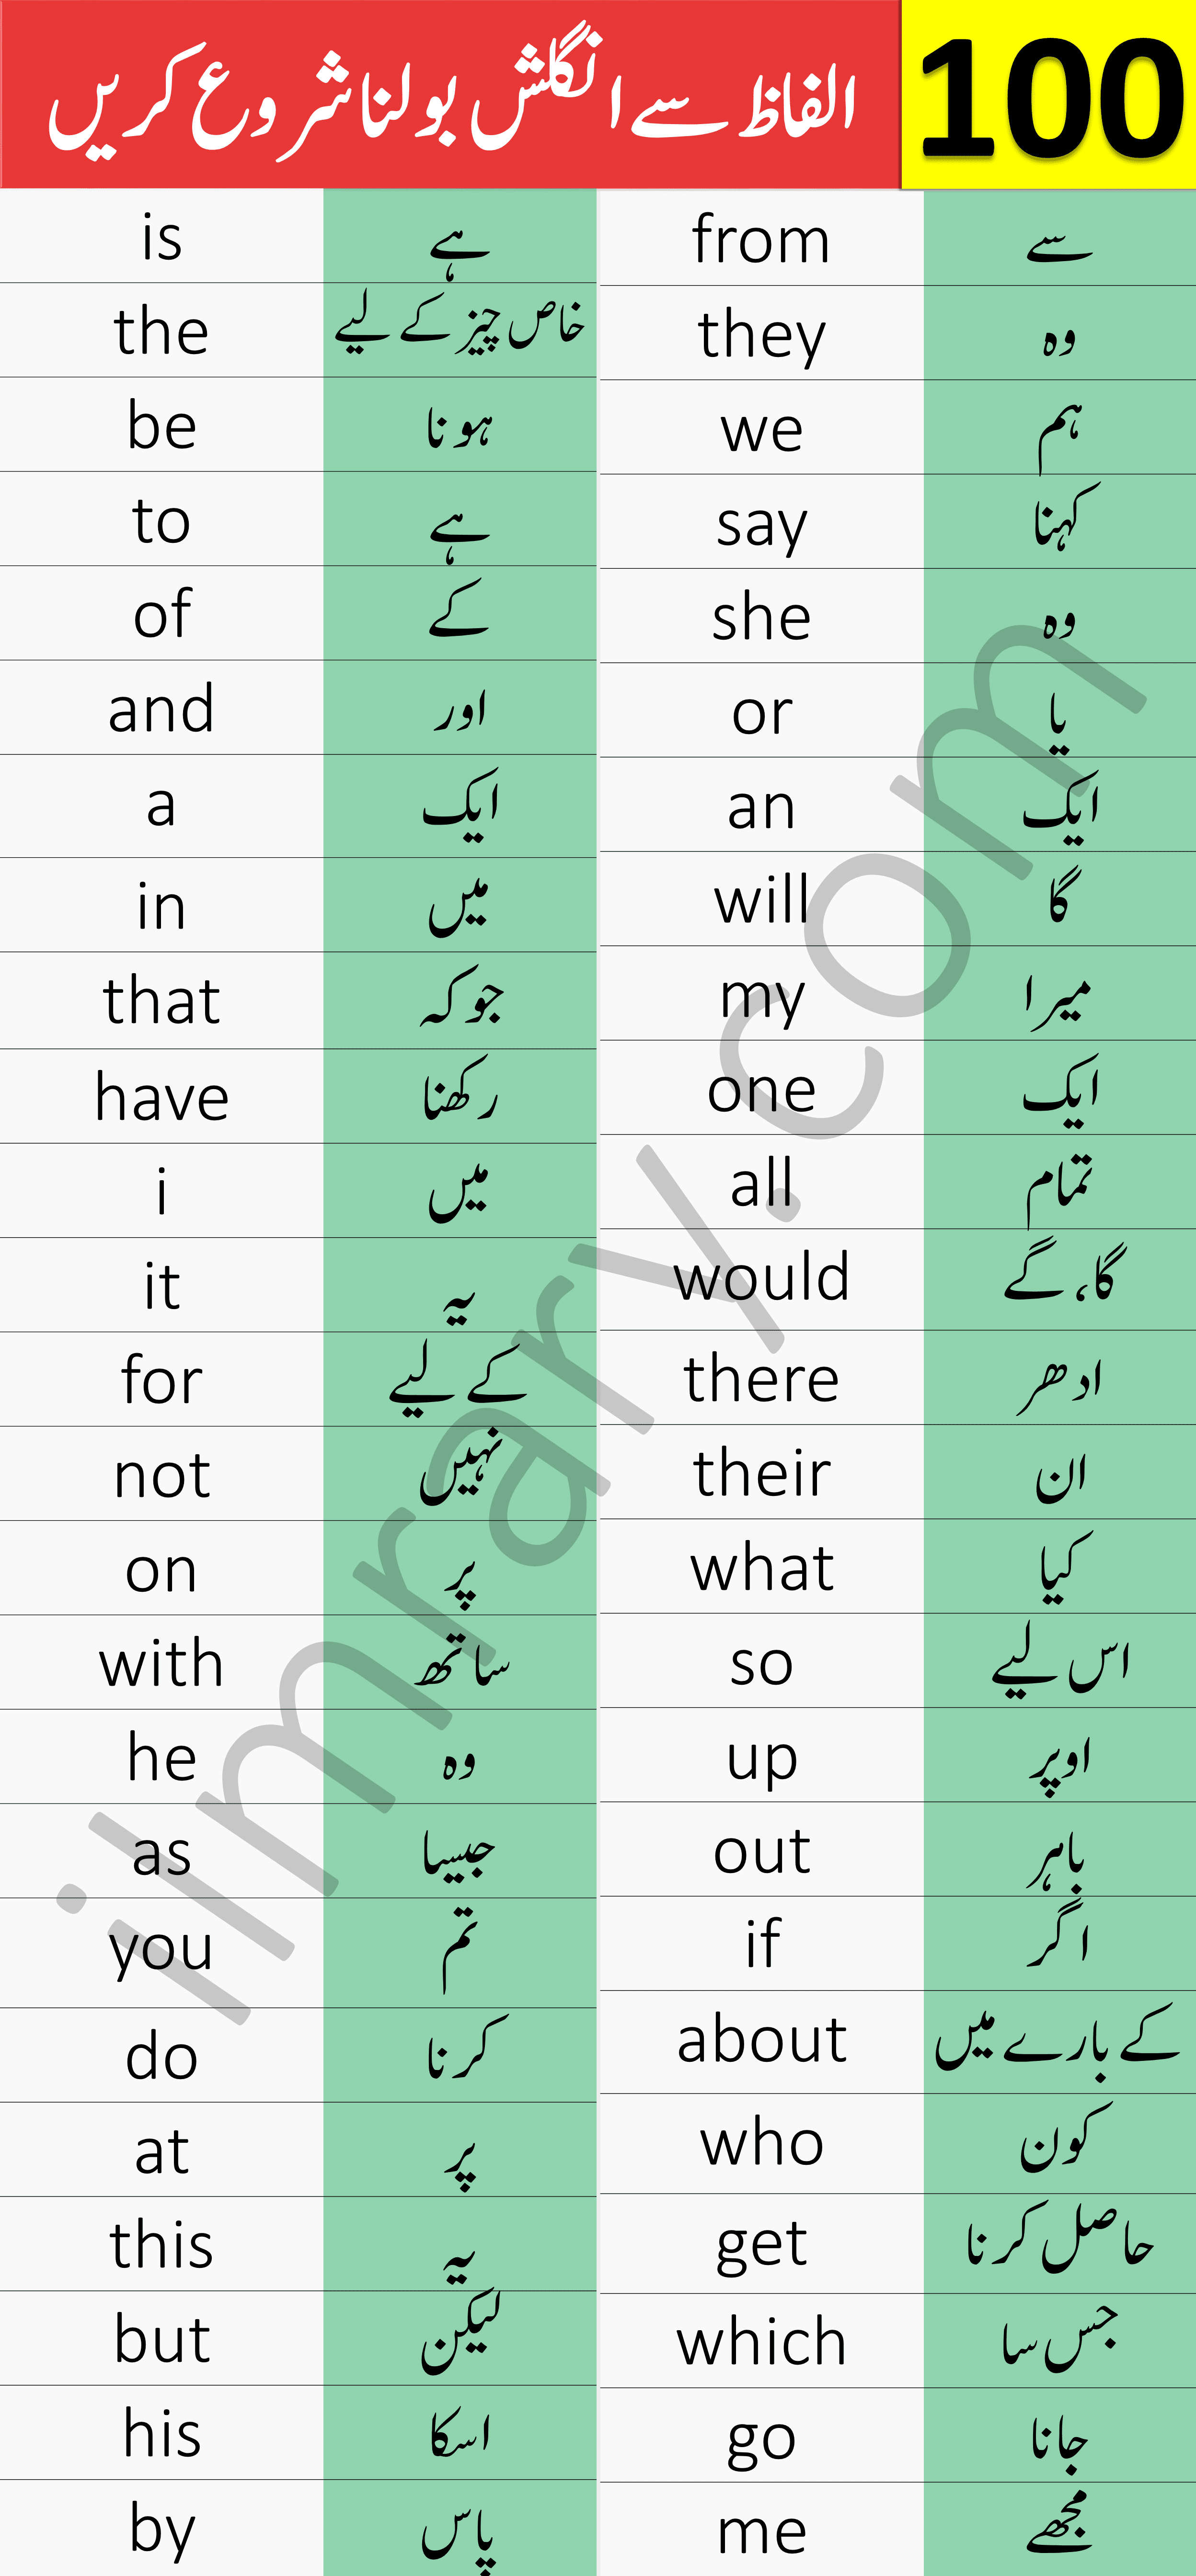 meaning of visit in urdu and english